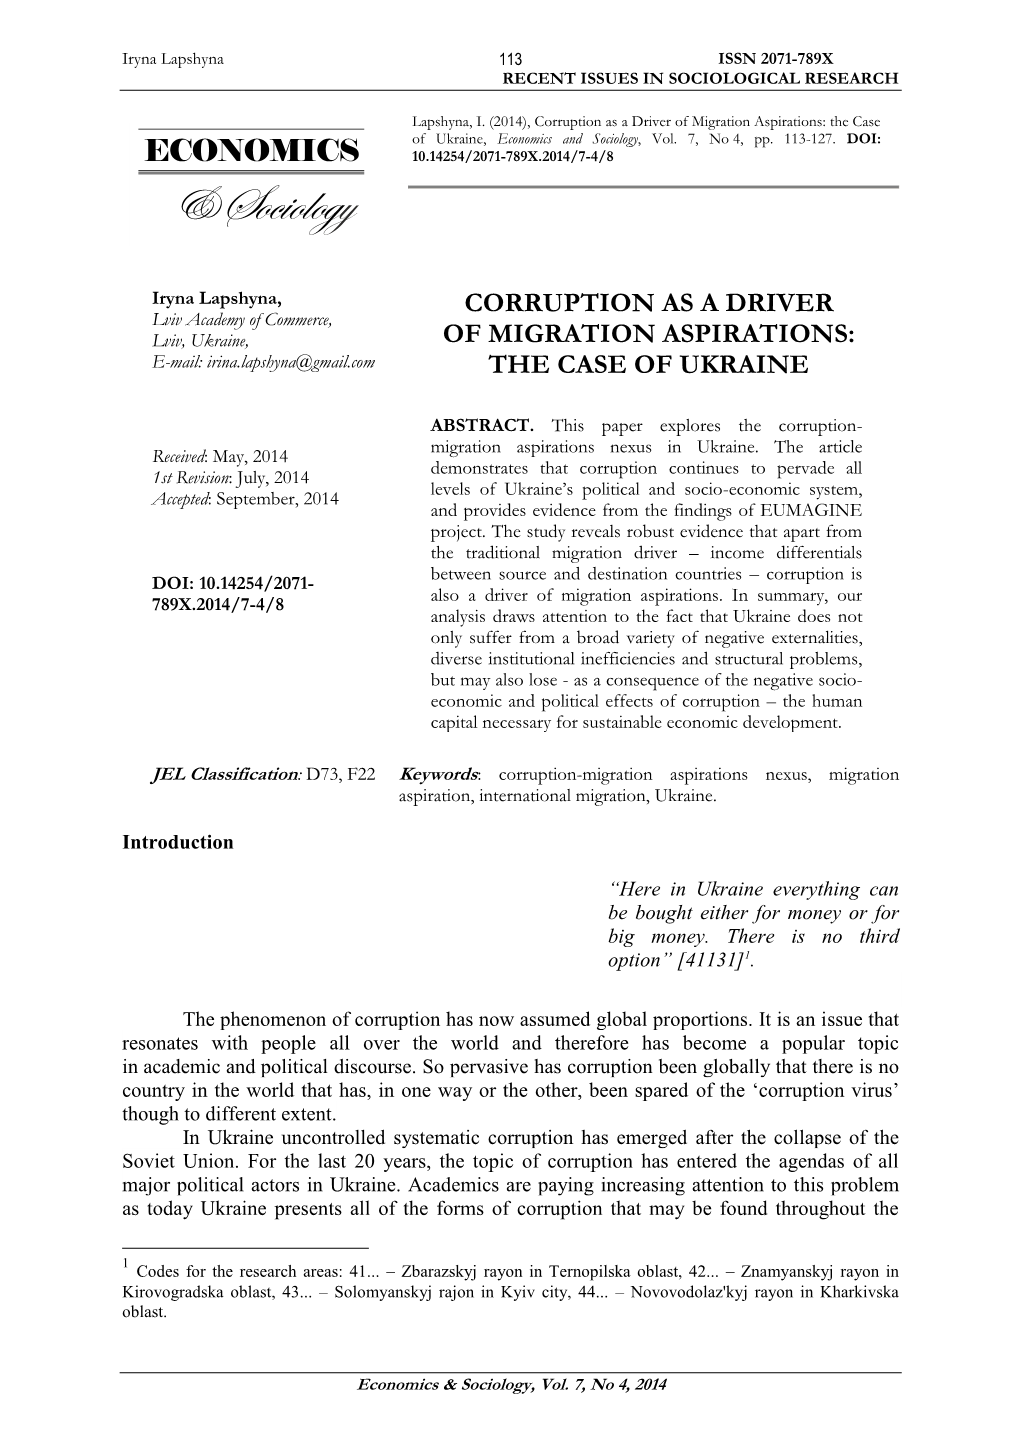 Corruption As a Driver of Migration Aspirations: the Case of Ukraine, Economics and Sociology, Vol